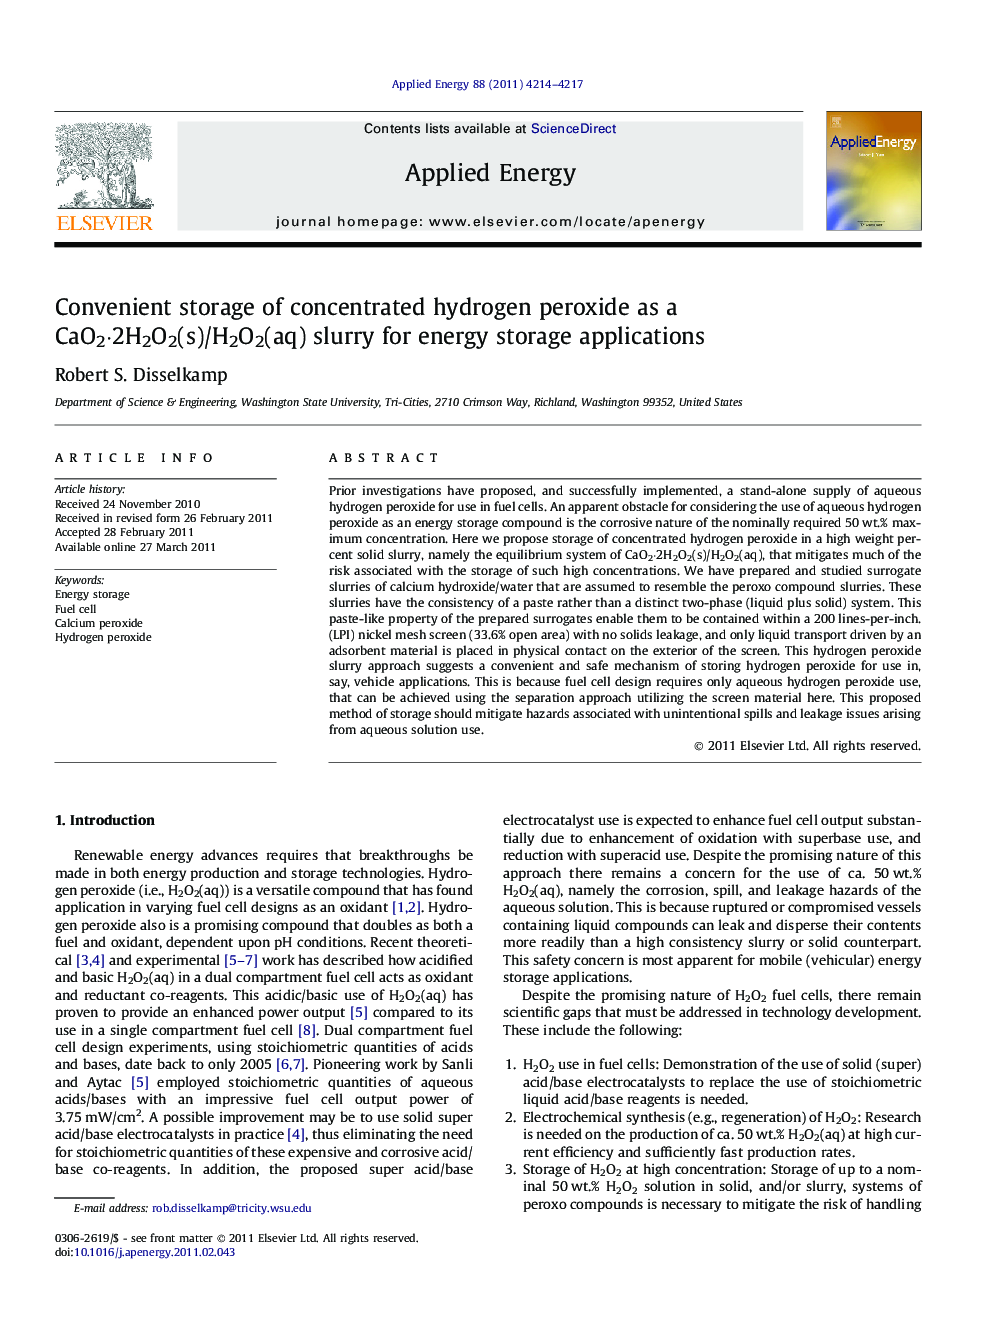 Convenient storage of concentrated hydrogen peroxide as a CaO2·2H2O2(s)/H2O2(aq) slurry for energy storage applications